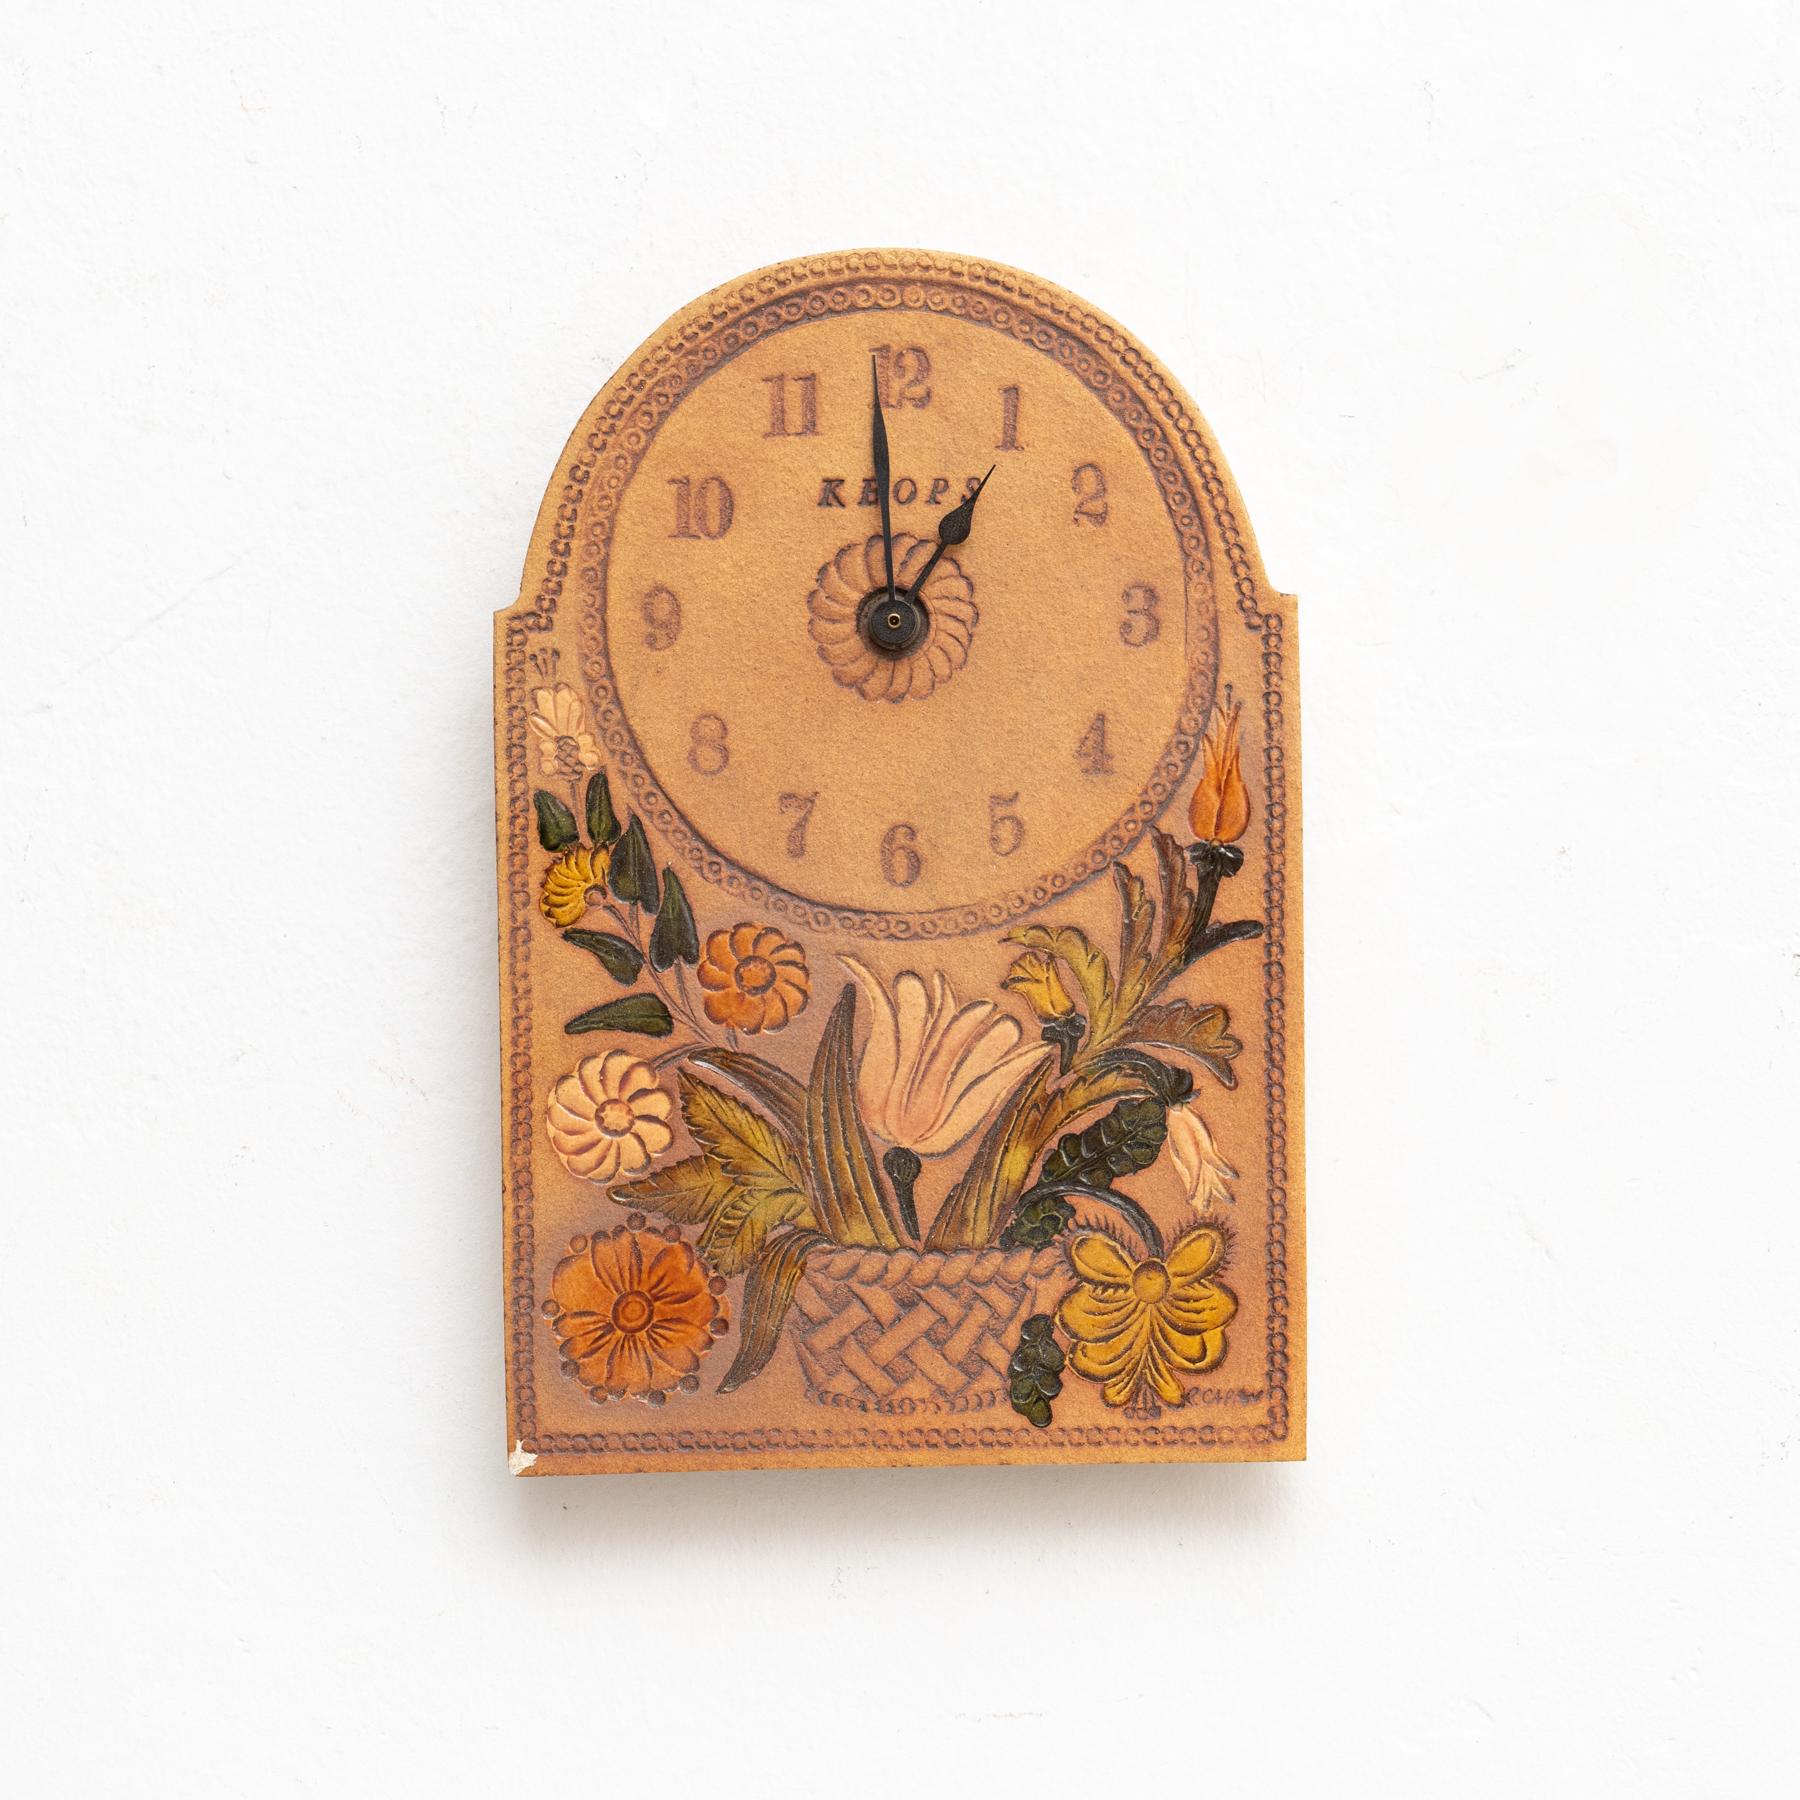 Roger Capron wall mounted ceramic clock, circa 1960

Manufactured by Roger Capron in France.

In original condition with minor wear consistent of age and use, preserving a beautiful patina.

Materials:
Ceramic.